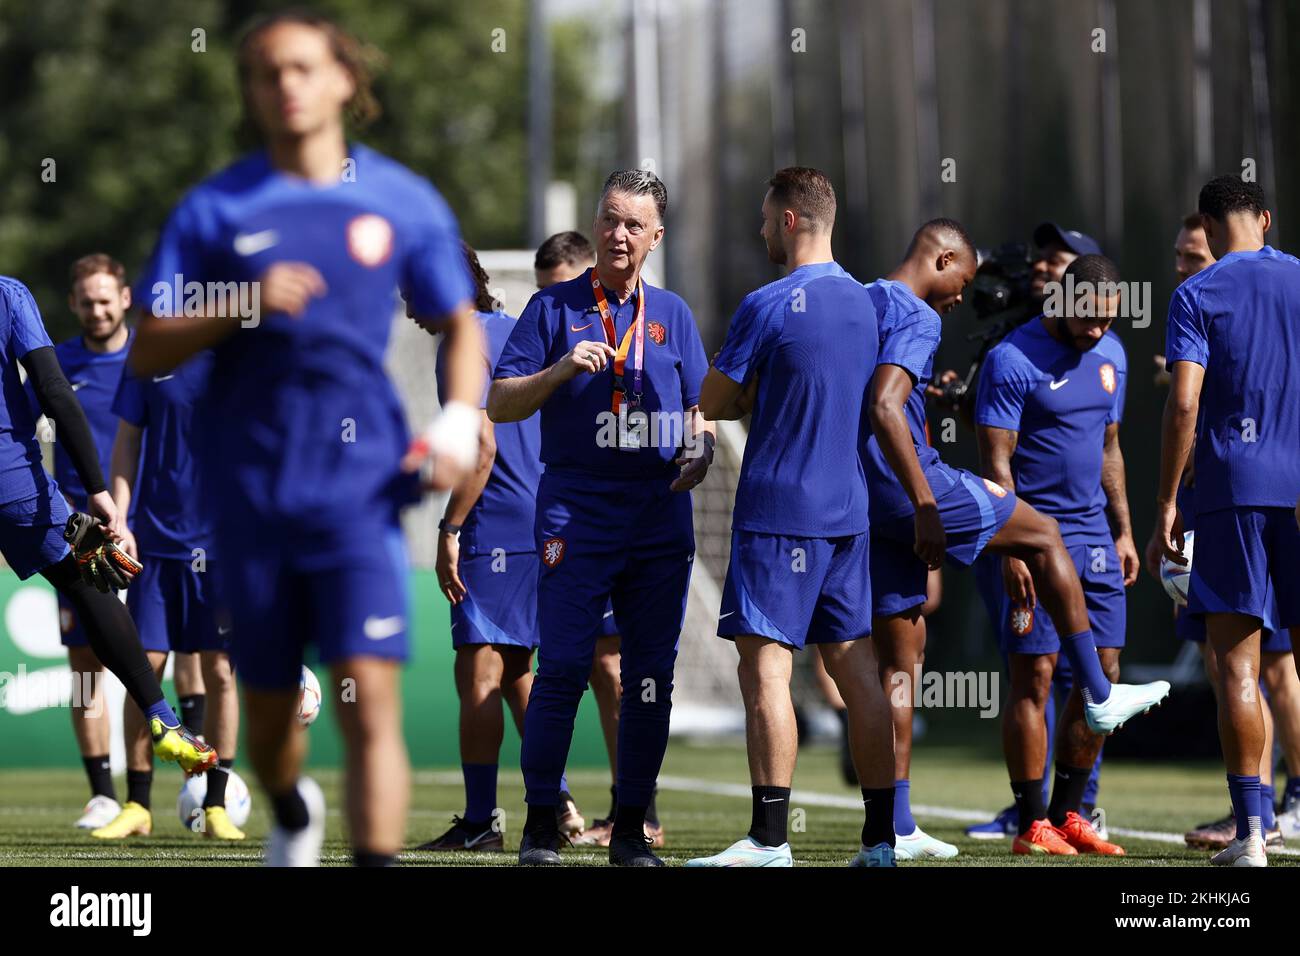 DOHA - (lr) Coach Louis van Gaal, Teun Koopmeiners during a training session of the Dutch national team at the Qatar University training complex on November 24, 2022 in Doha, Qatar. The Dutch national team is preparing for the World Cup match against Ecuador. ANP KOEN VAN WEEL Stock Photo